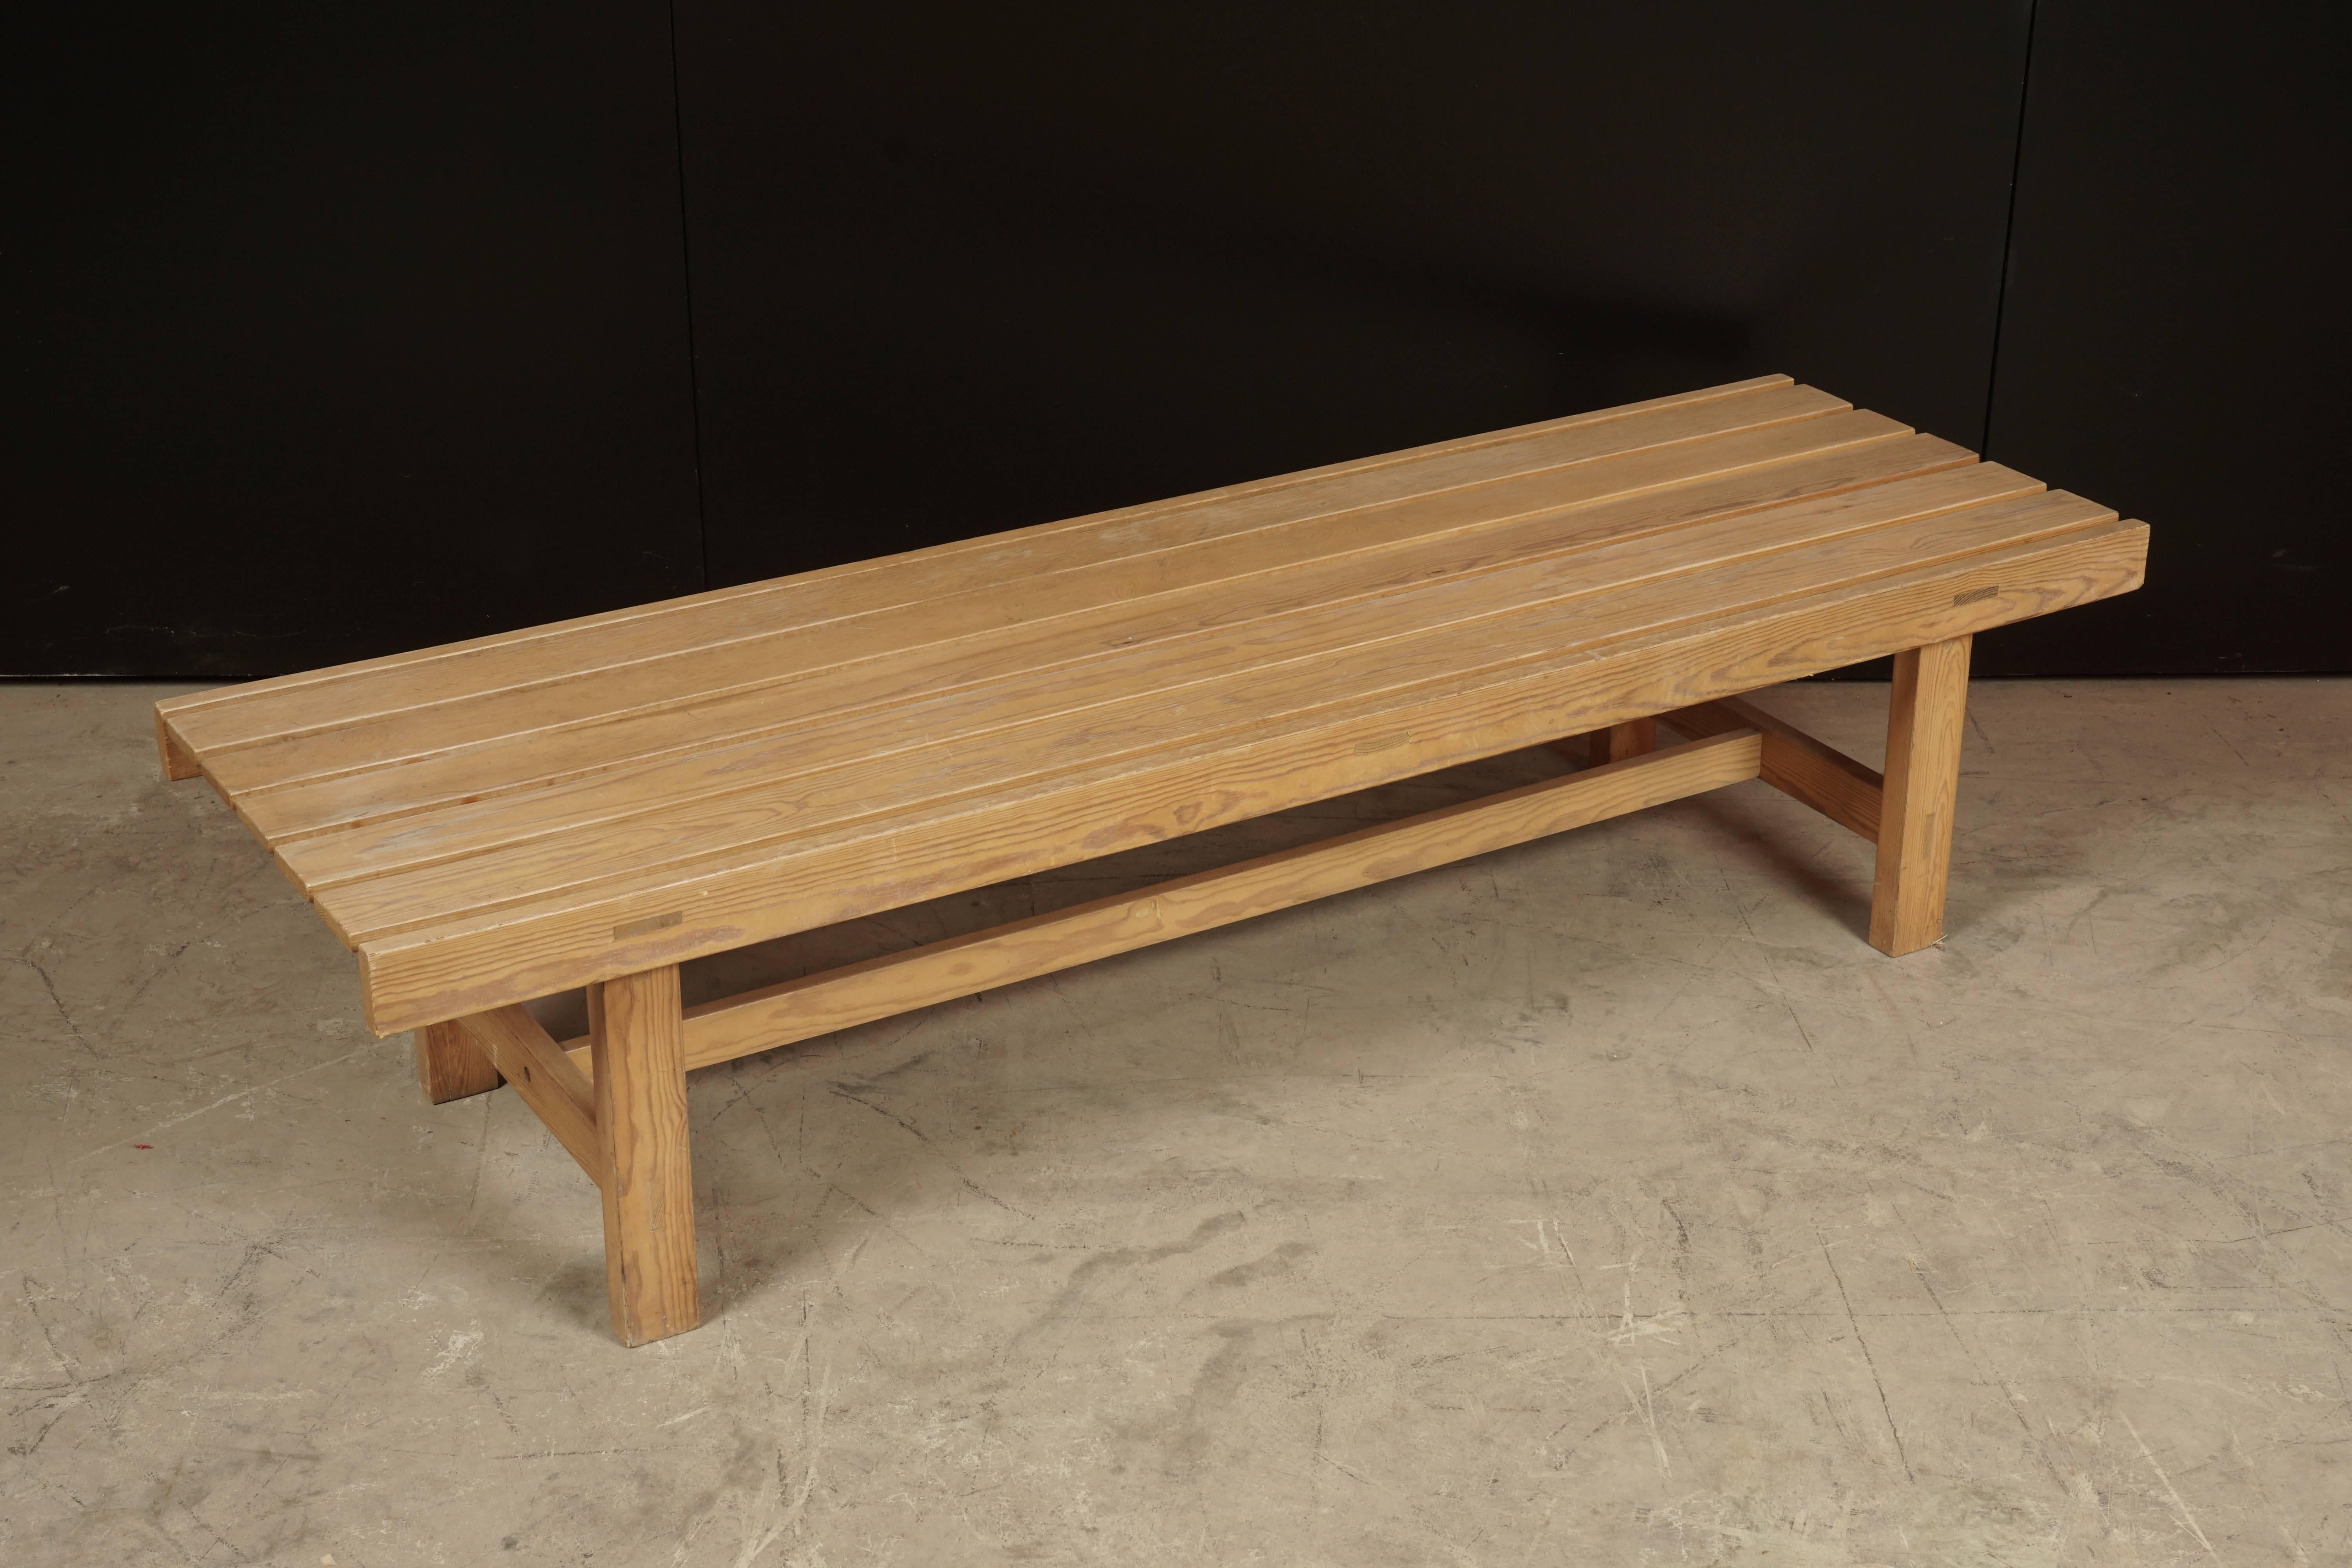 Pine coffee table from Sweden manufactured by Laboremus Viborg, circa 1970.